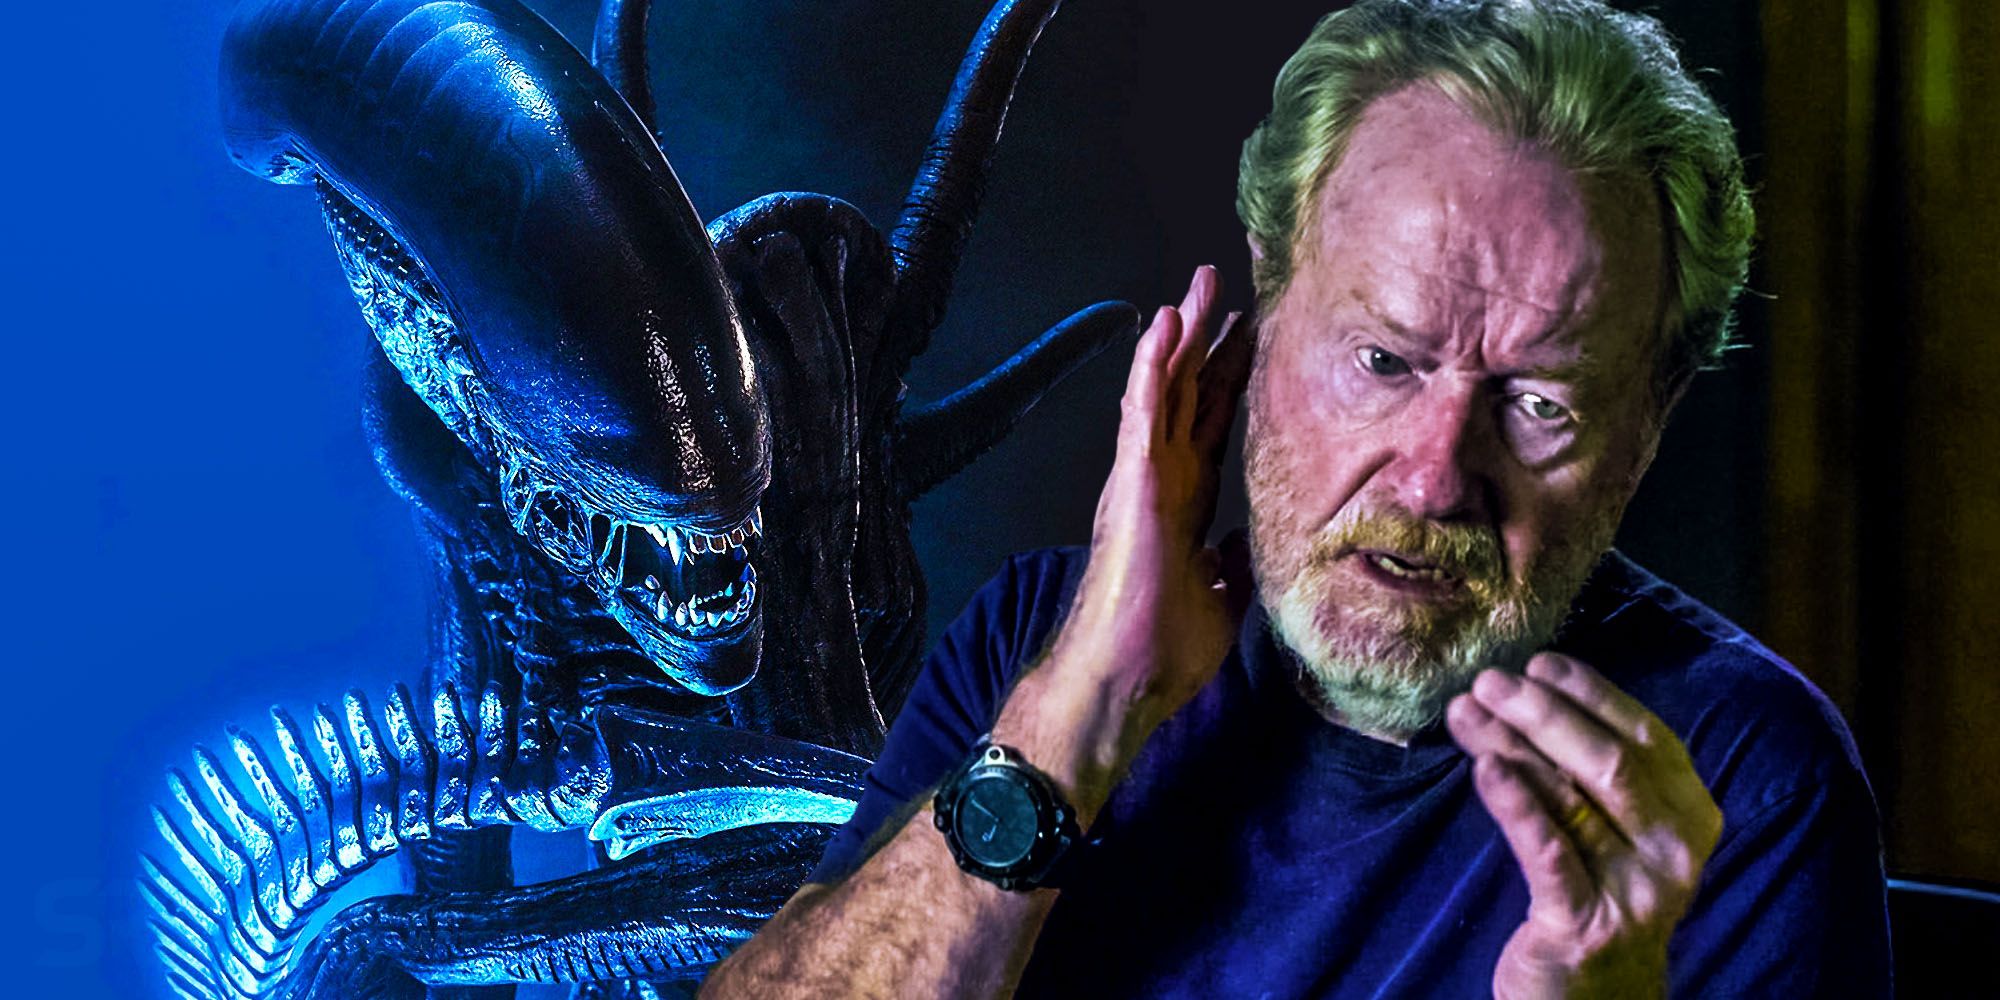 ridley scott is wrong about aliens tv series